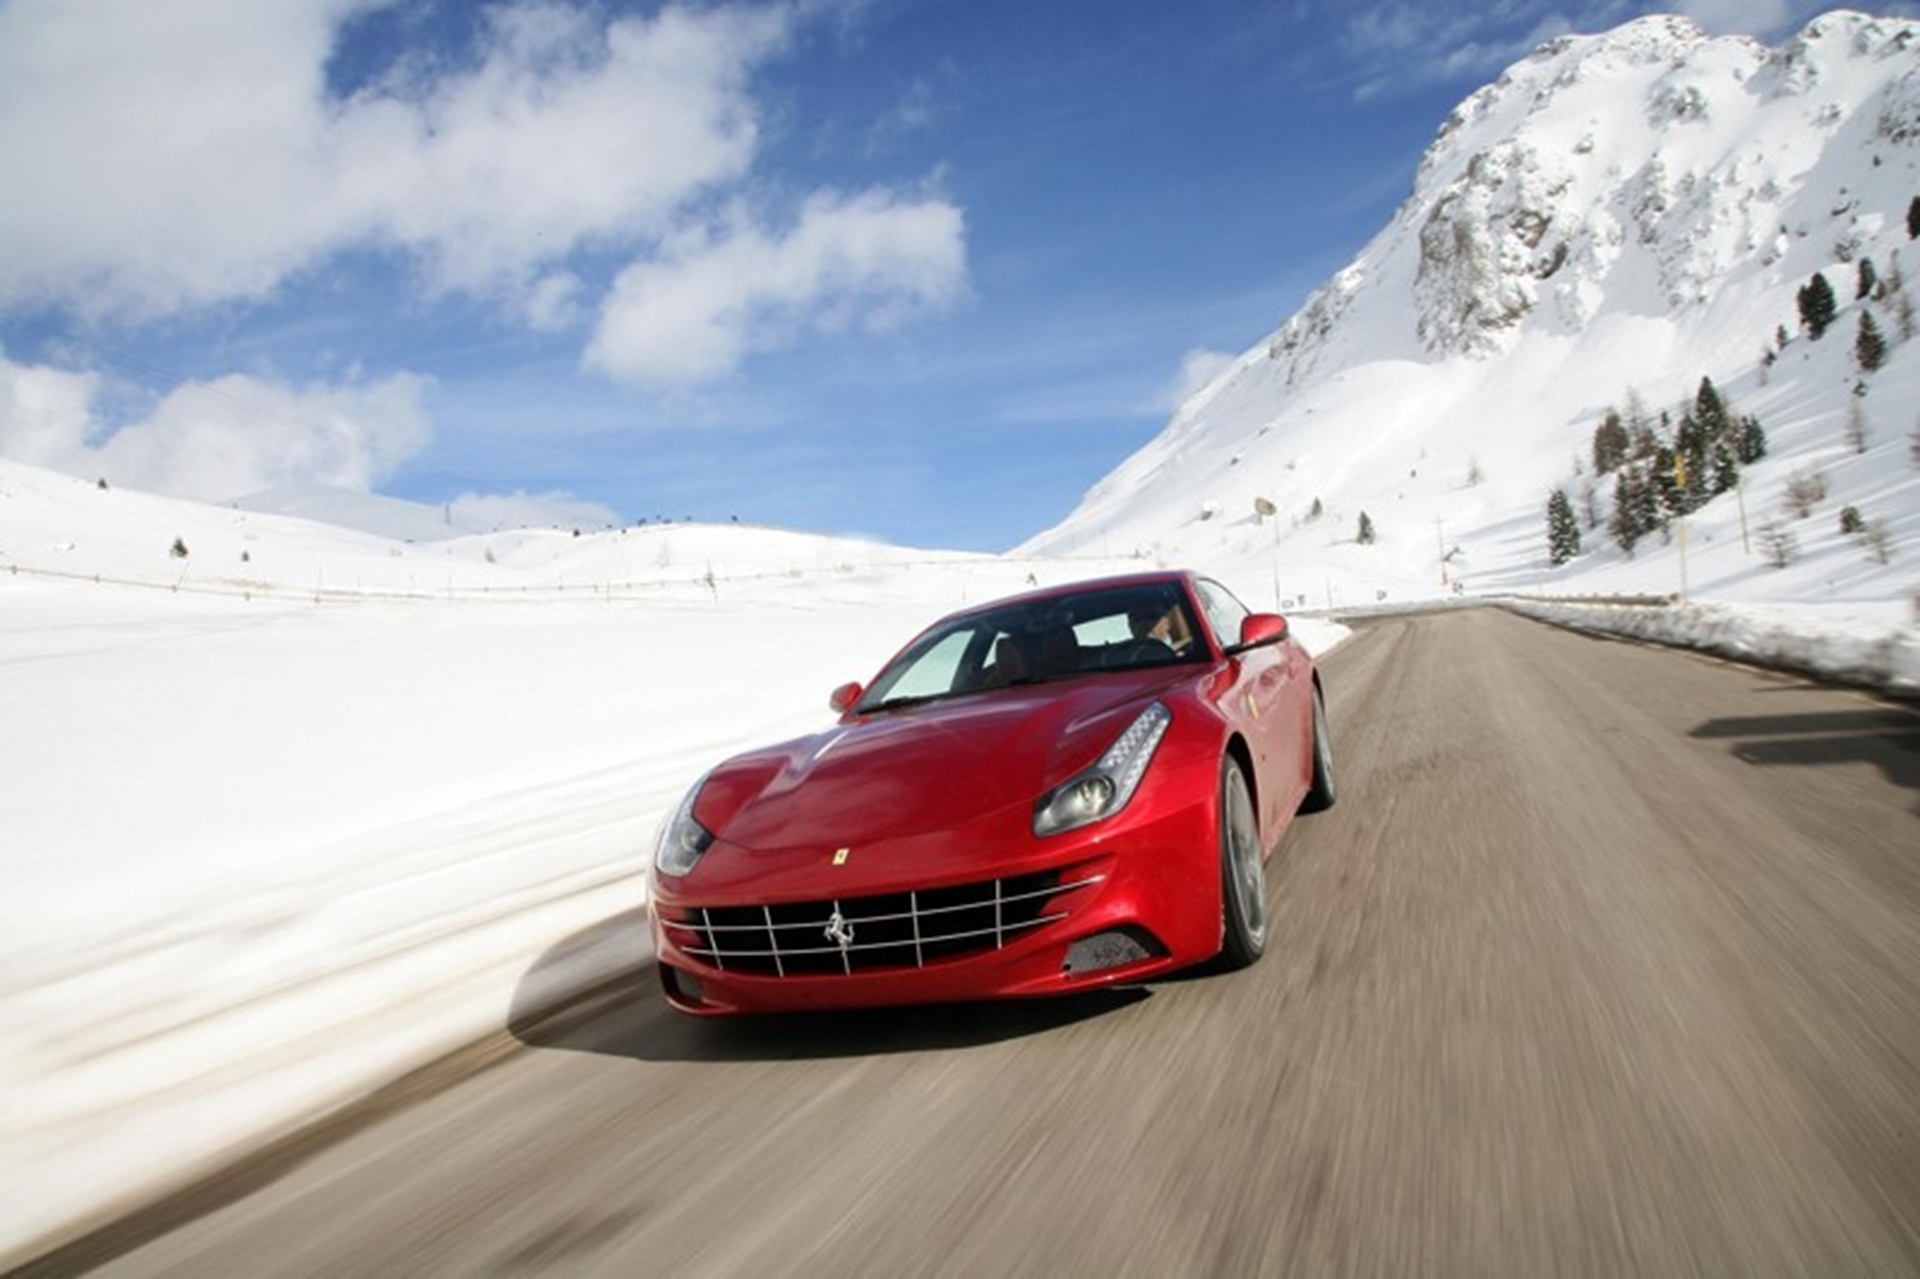 FERRARI BOARD EXAMINES VERY GOOD RESULTS FOR FIRST NINE MONTHS OF 2011